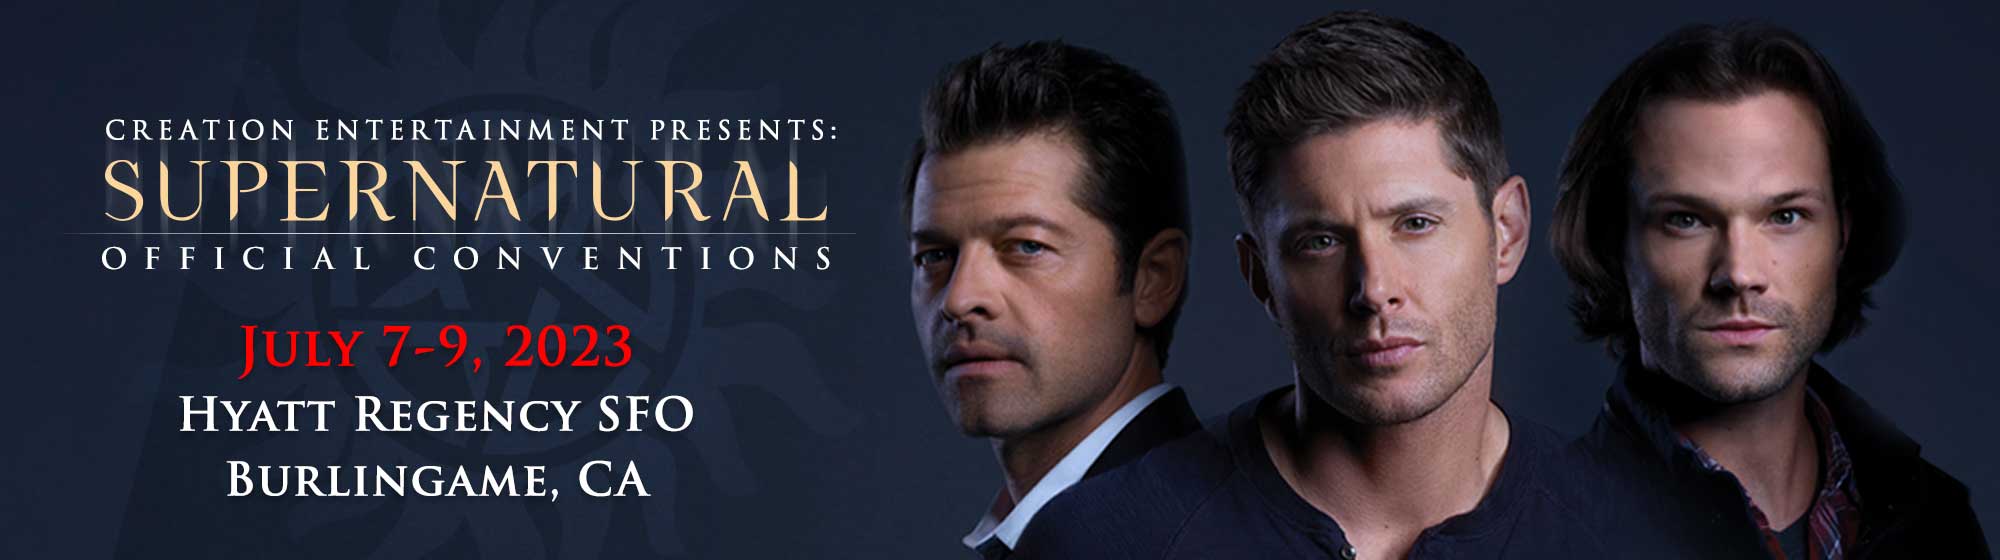 https://www.creationent.com/cal/con_images/sn_subs/site_headers/officialHeaders/snSF23.jpg